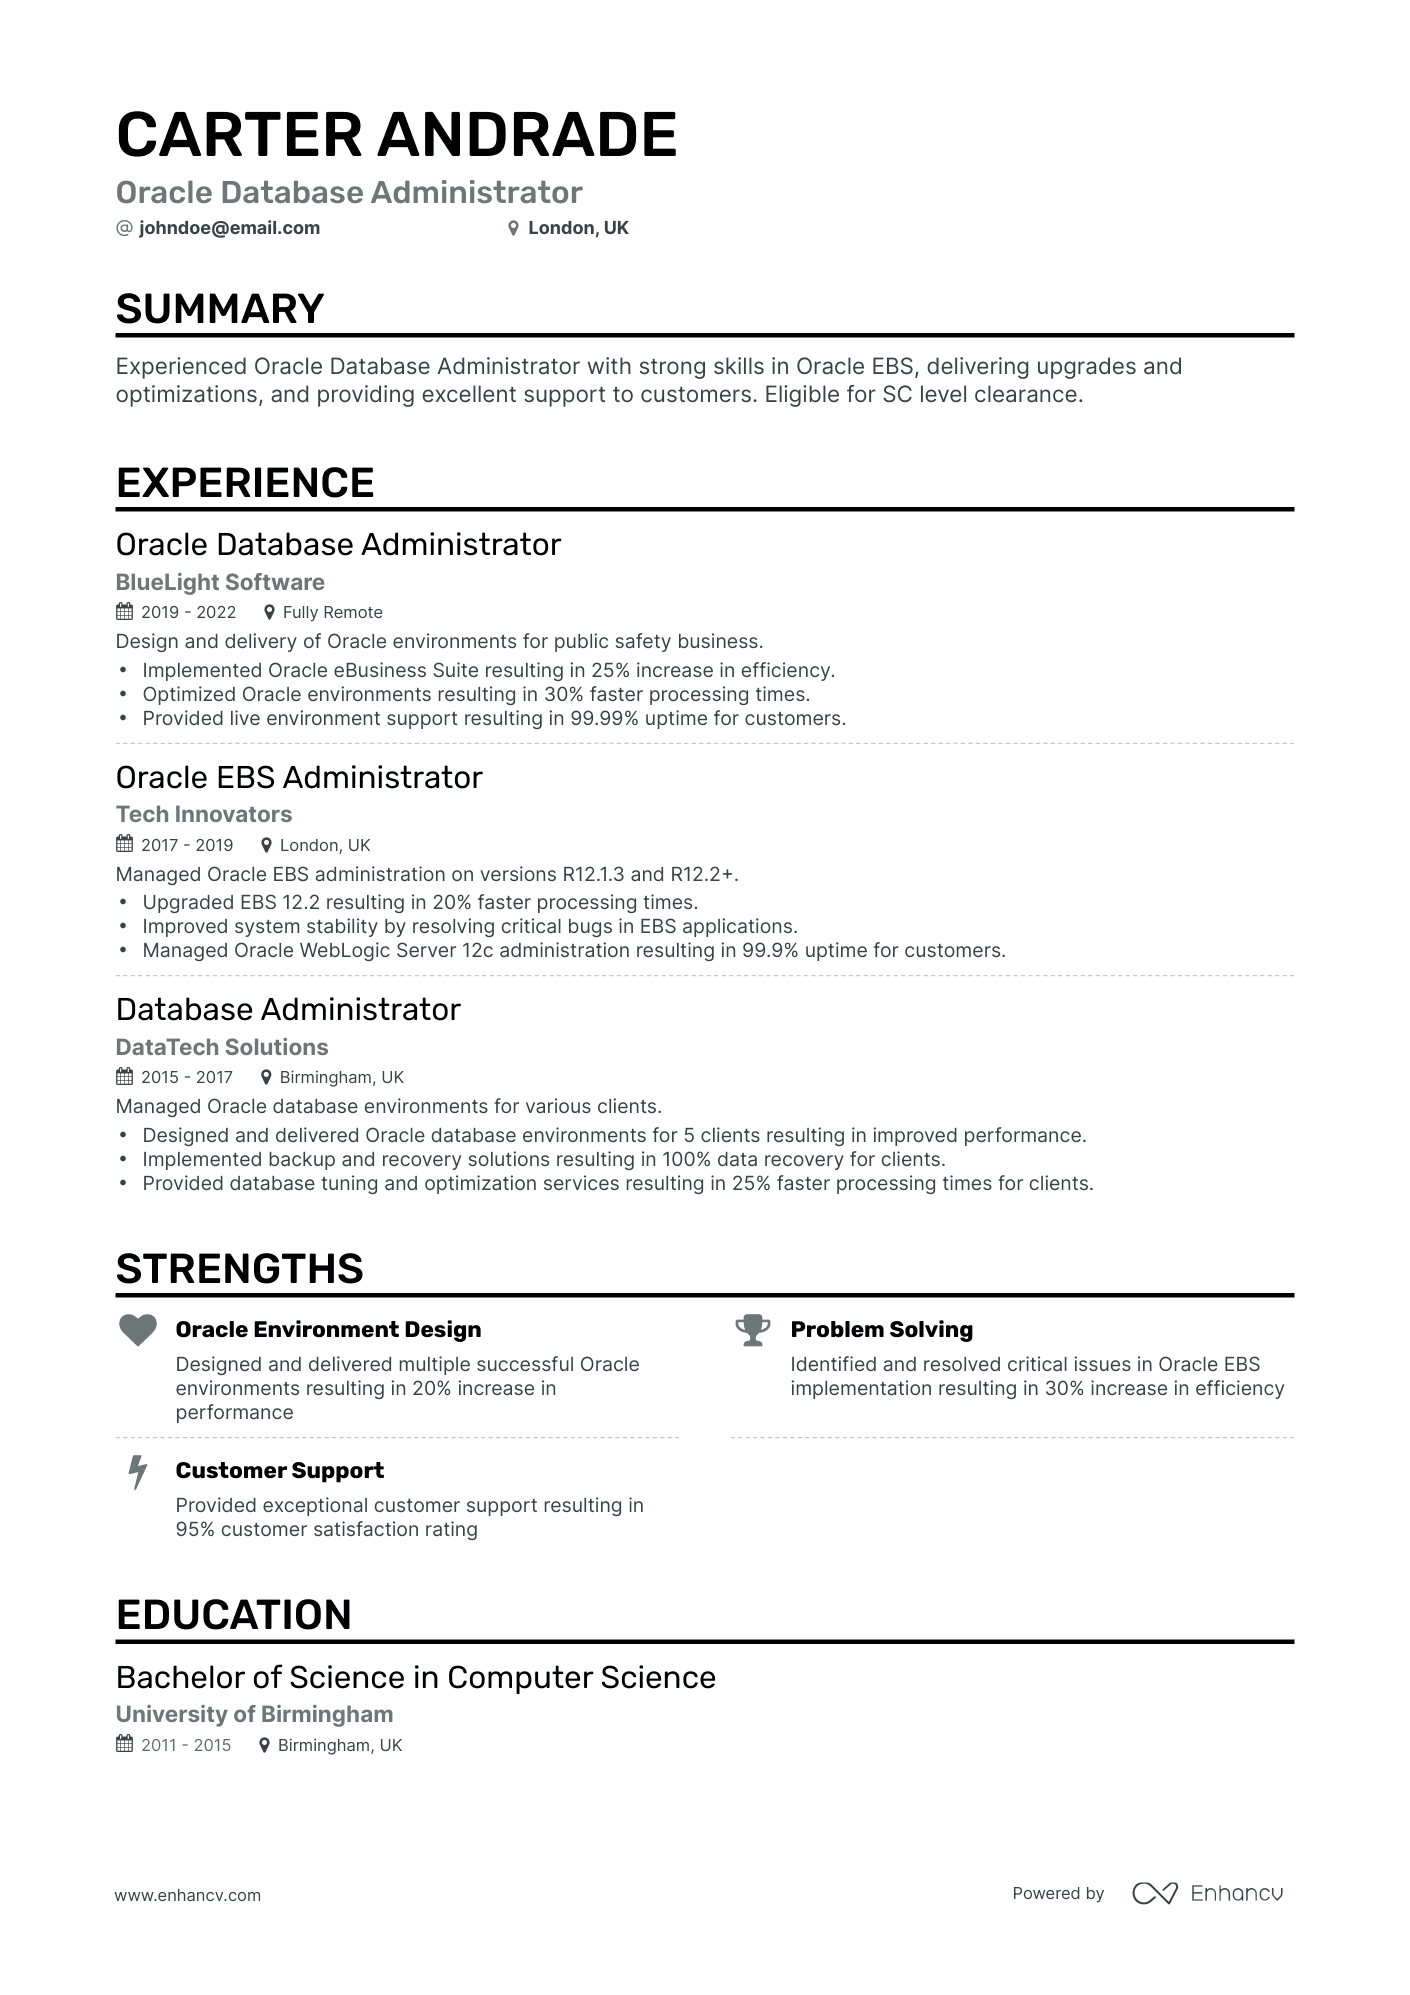 Classic Oracle Database Administrator Resume Template